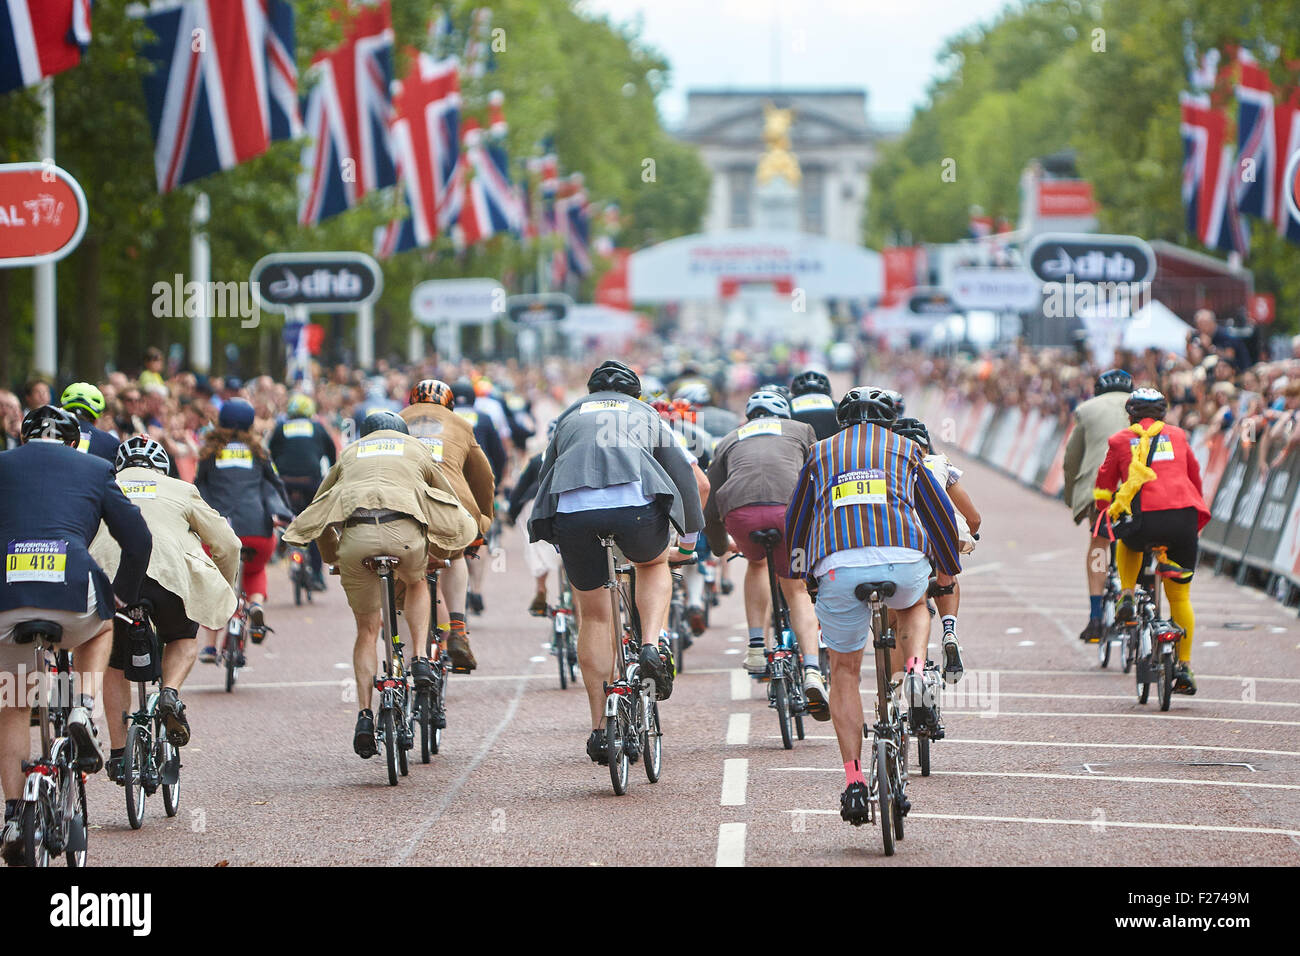 Competitors take part in the 10th Brompton World Championship bike race in St James' Park Stock Photo